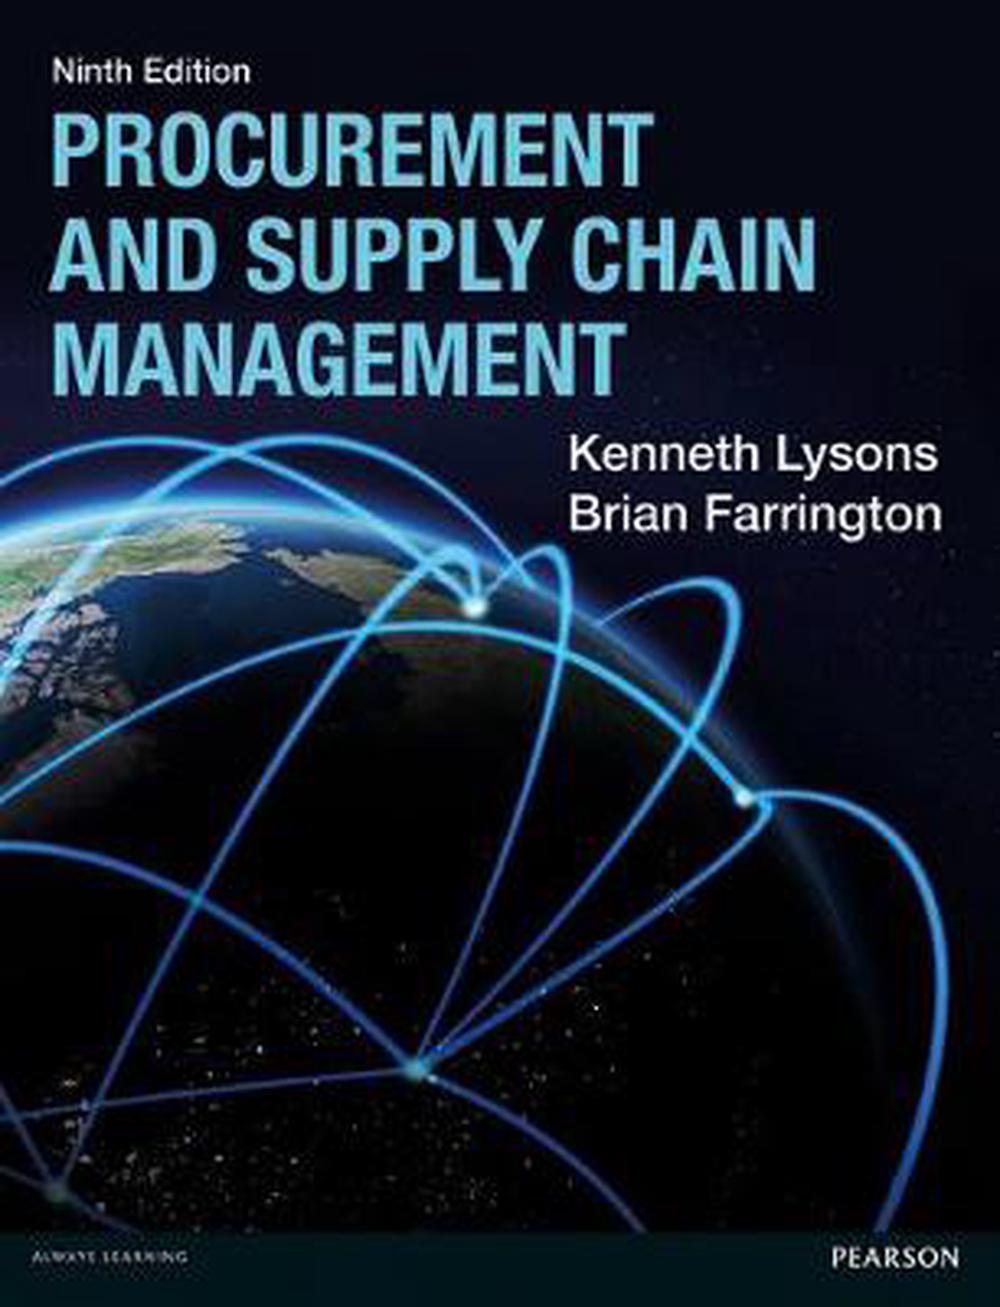 thesis on procurement and supply chain management